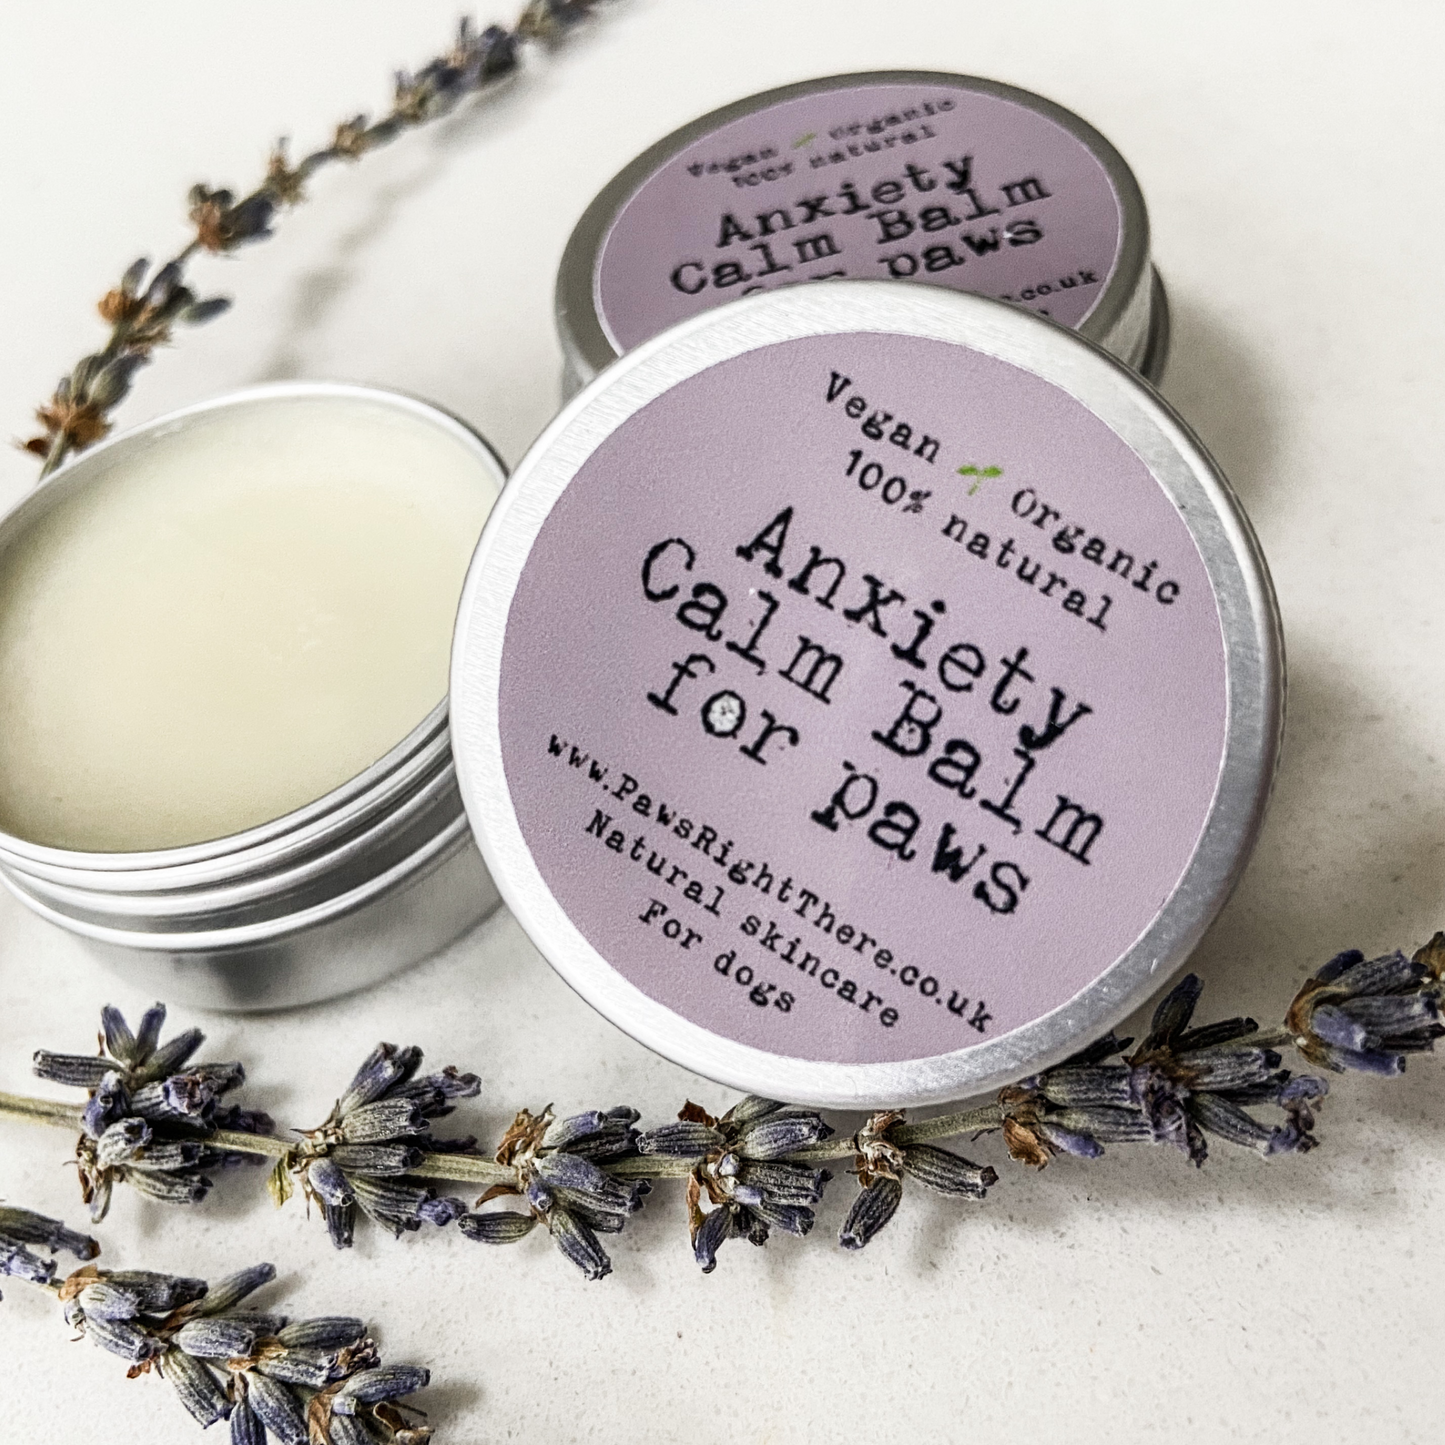 Paw Balm for ANXIOUS dogs, VEGAN, NATURAL, CRUELTY FREE